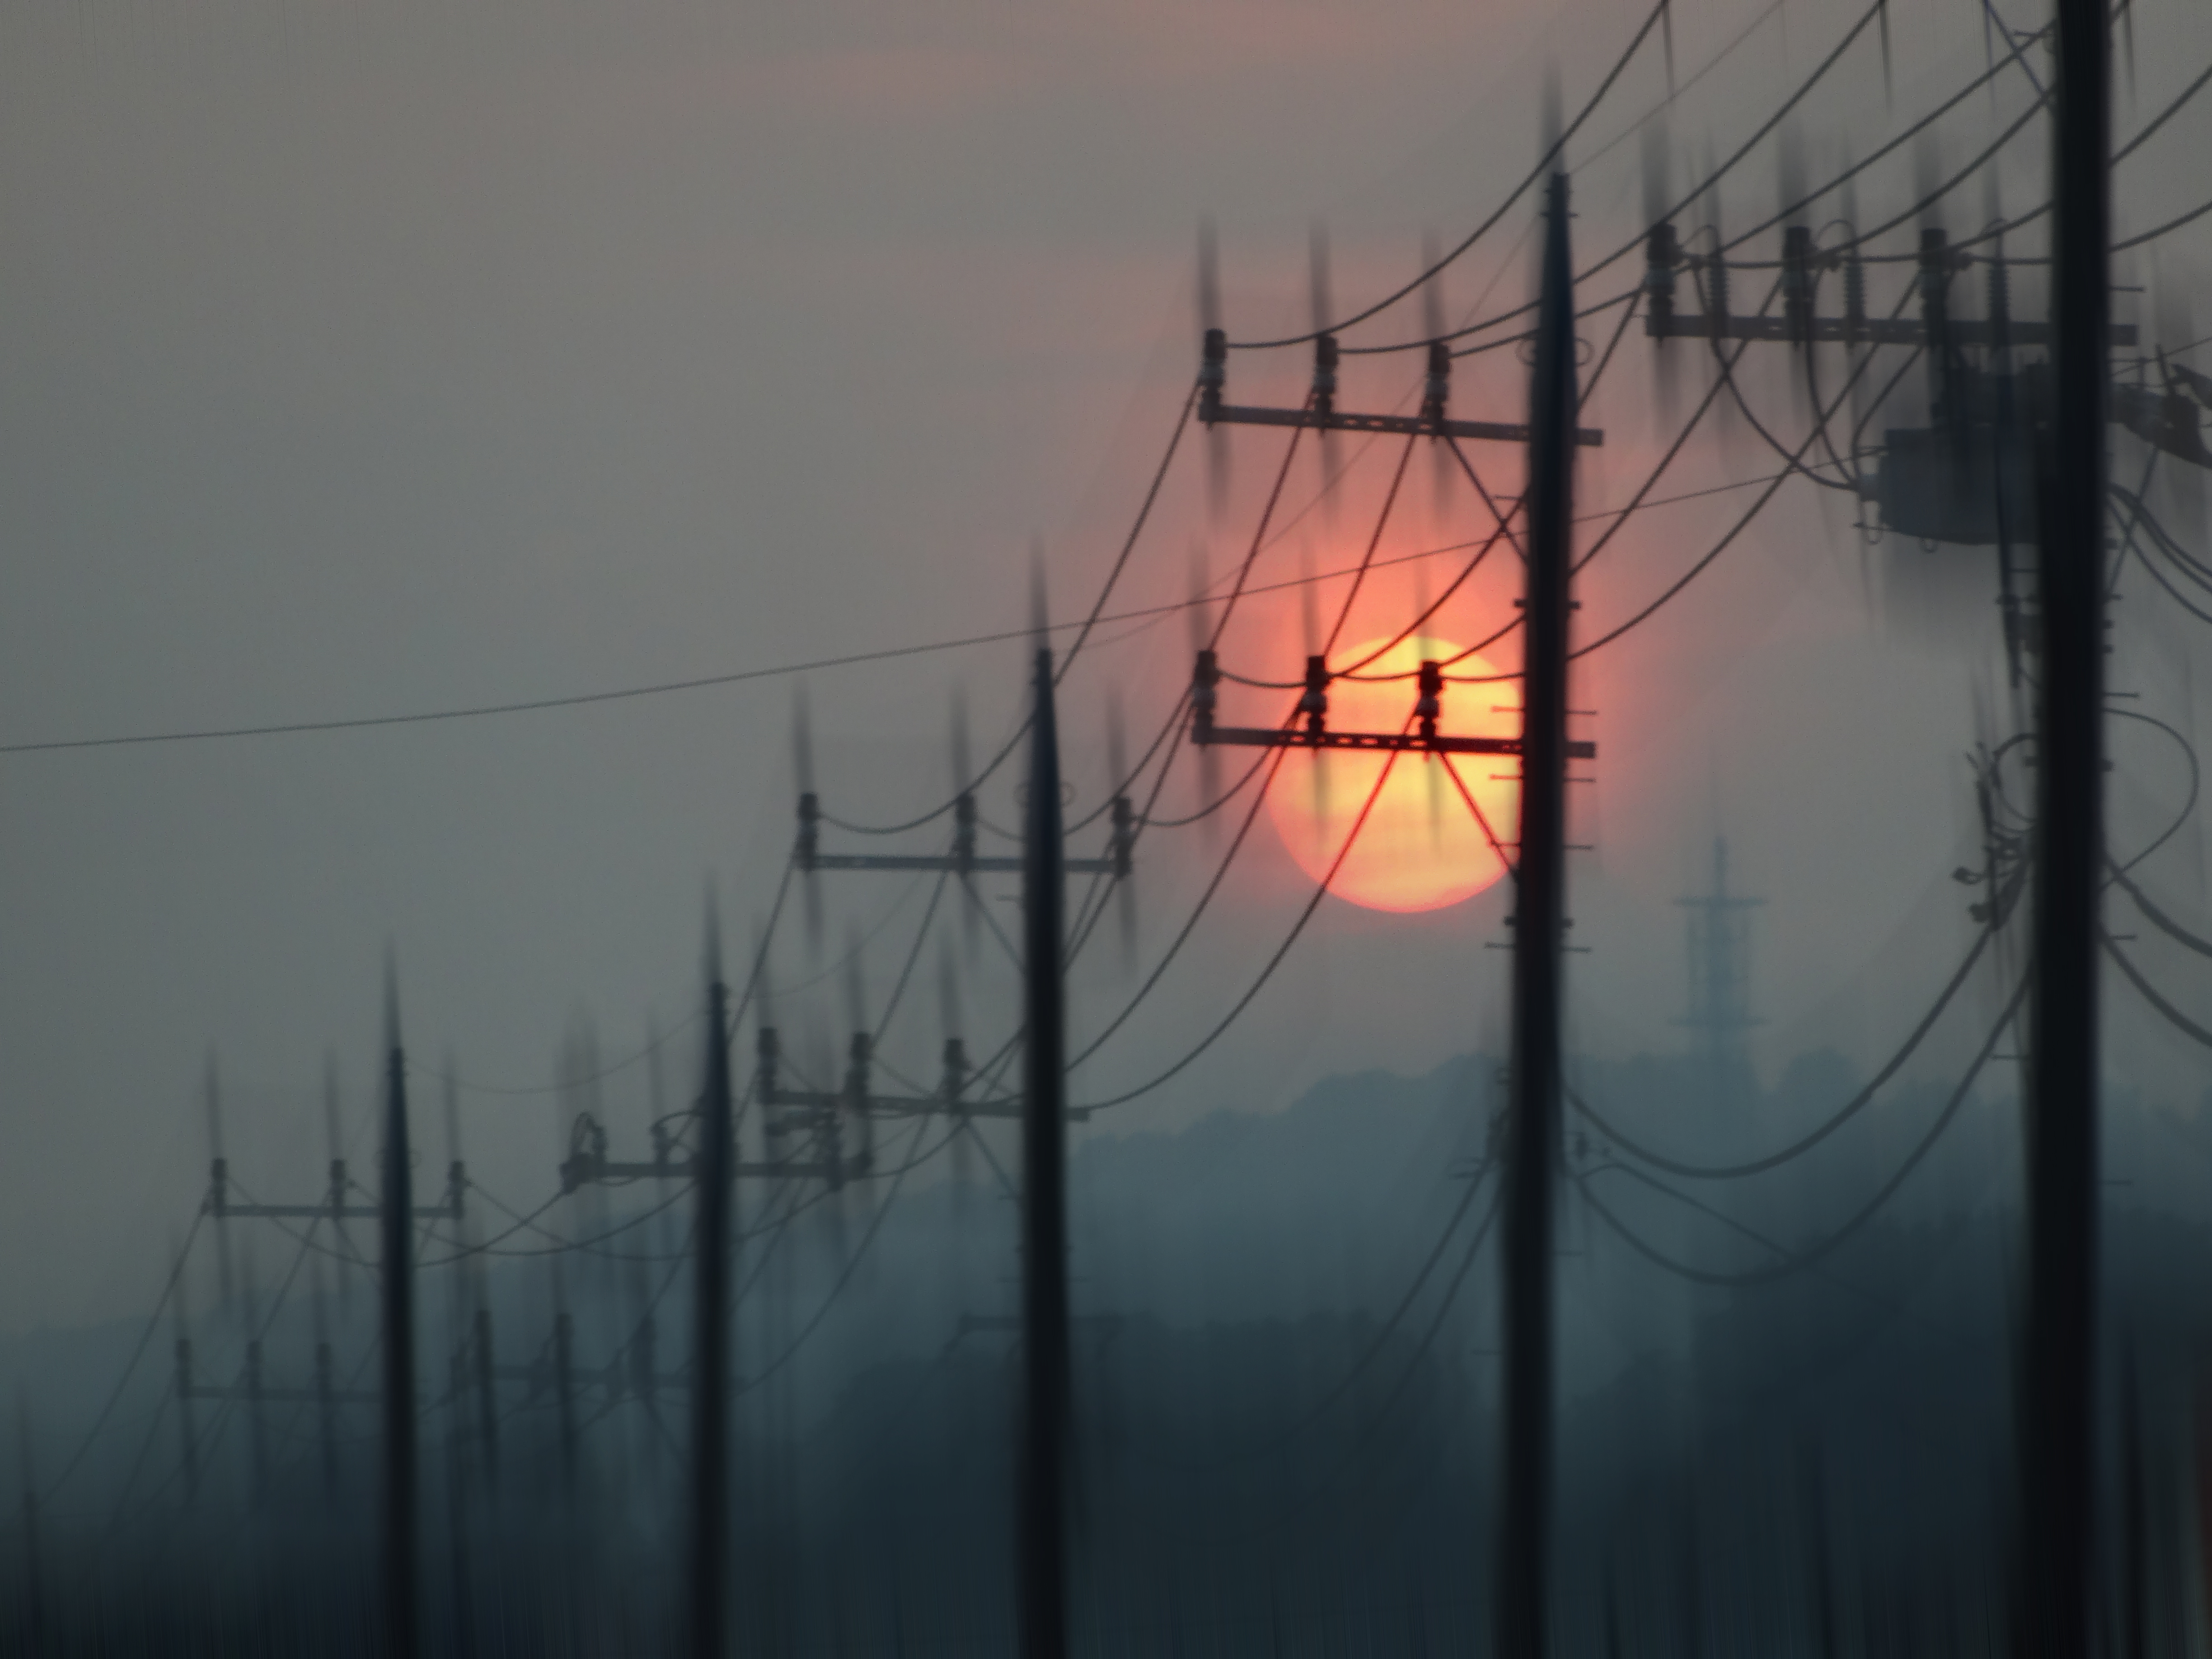 sunset, sun, miscellanea, miscellaneous, blur, smooth, pillars, posts, wires, wire